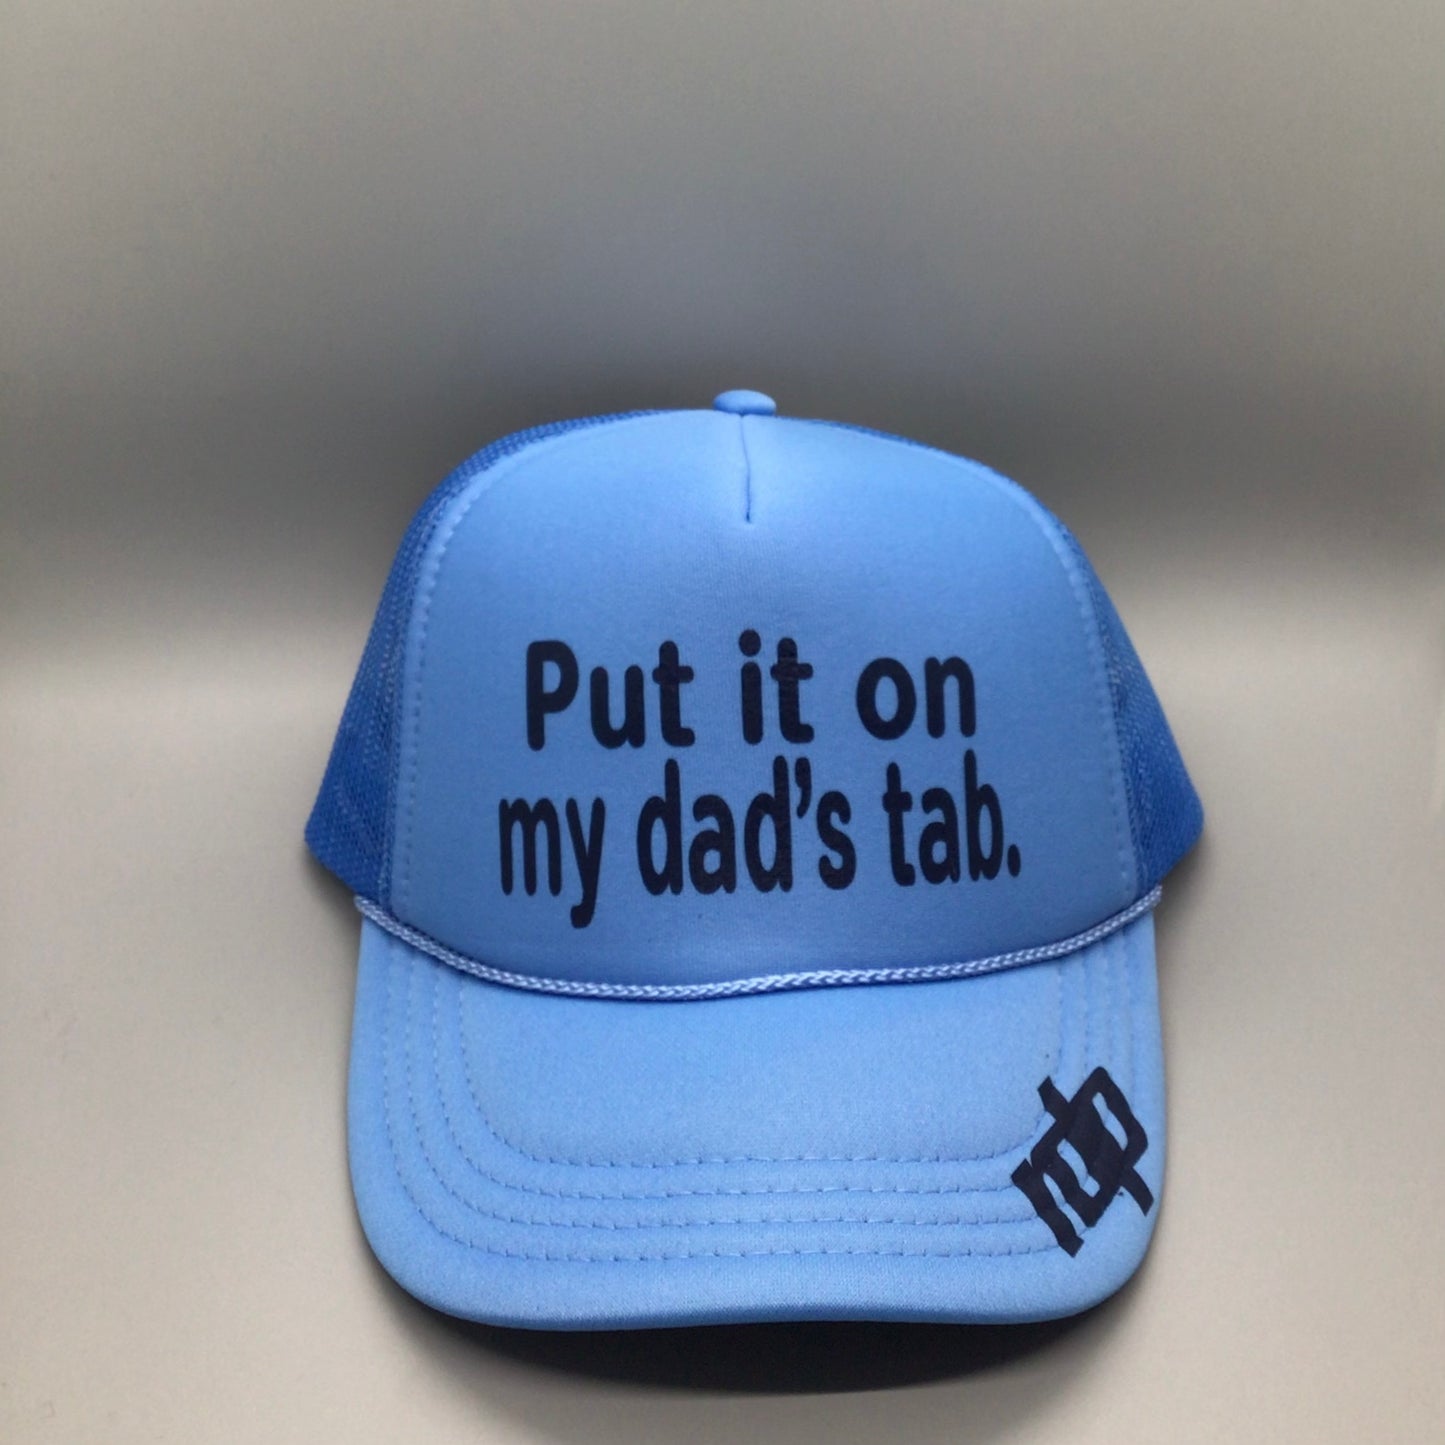 Youth "Put it on my dad's tab"